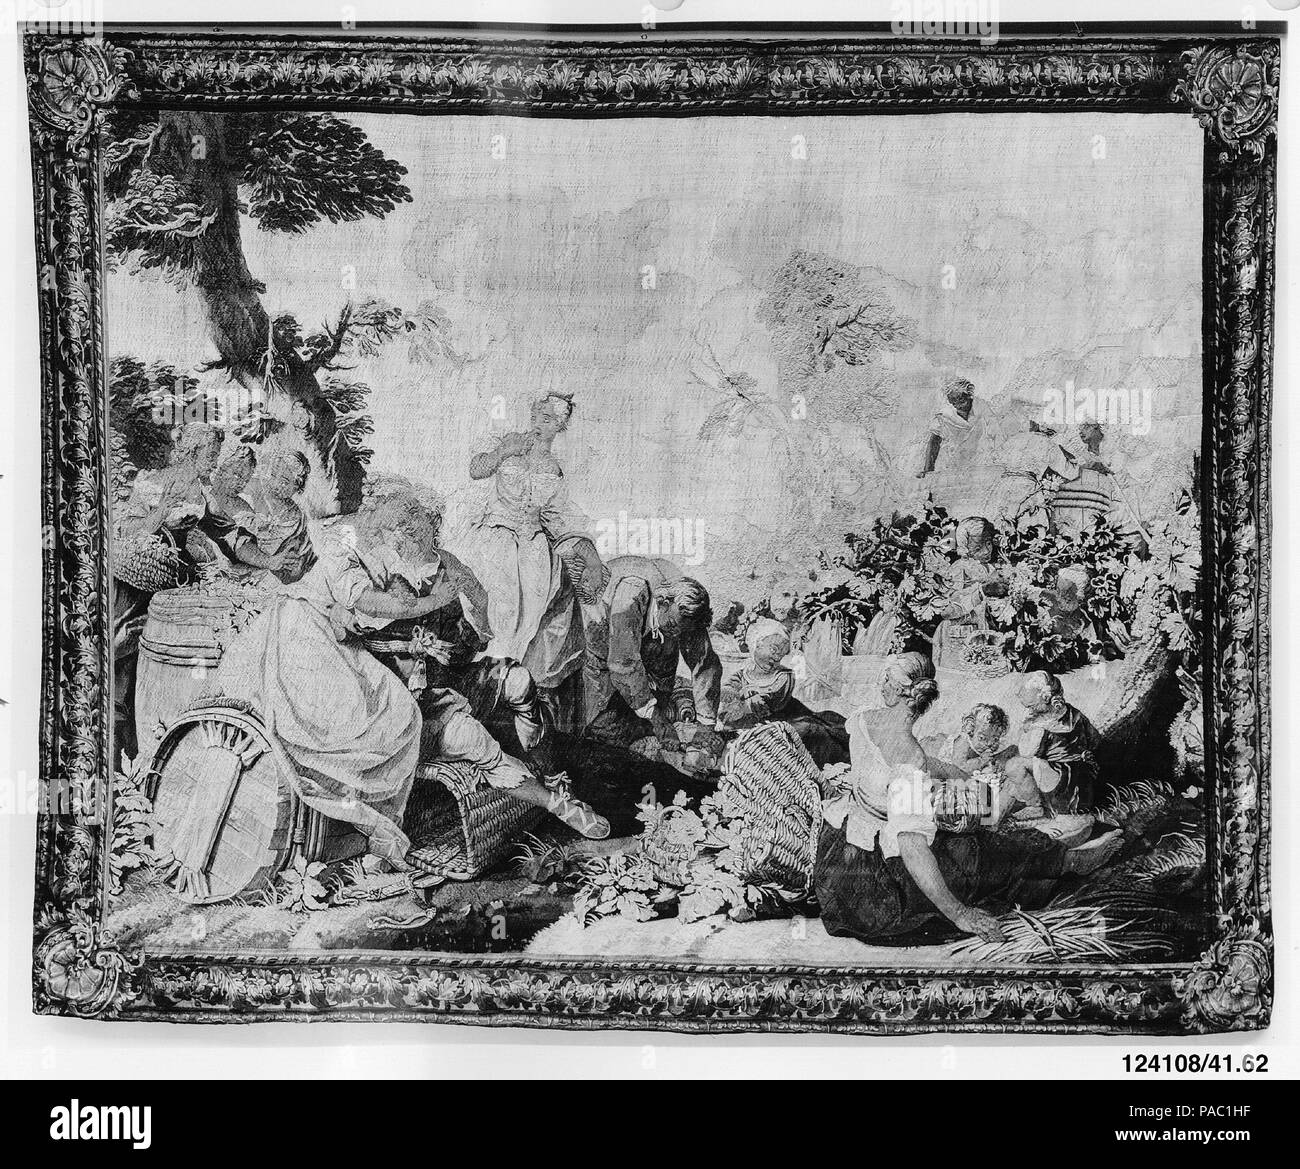 The Vintage from The Story of Daphnis and Chloe. Artist: After cartoons by Étienne Jeaurat (French, Vermenton 1699-1789 Versailles). Culture: French, Paris. Dimensions: H. 121 x W. 158 inches (307.3 x 401.3 cm). Maker: Workshop of Michel Audran (French, 1701-1771 Paris). Manufactory: Manufacture Nationale des Gobelins (French, established 1662). Date: 1741-54. Museum: Metropolitan Museum of Art, New York, USA. Stock Photo